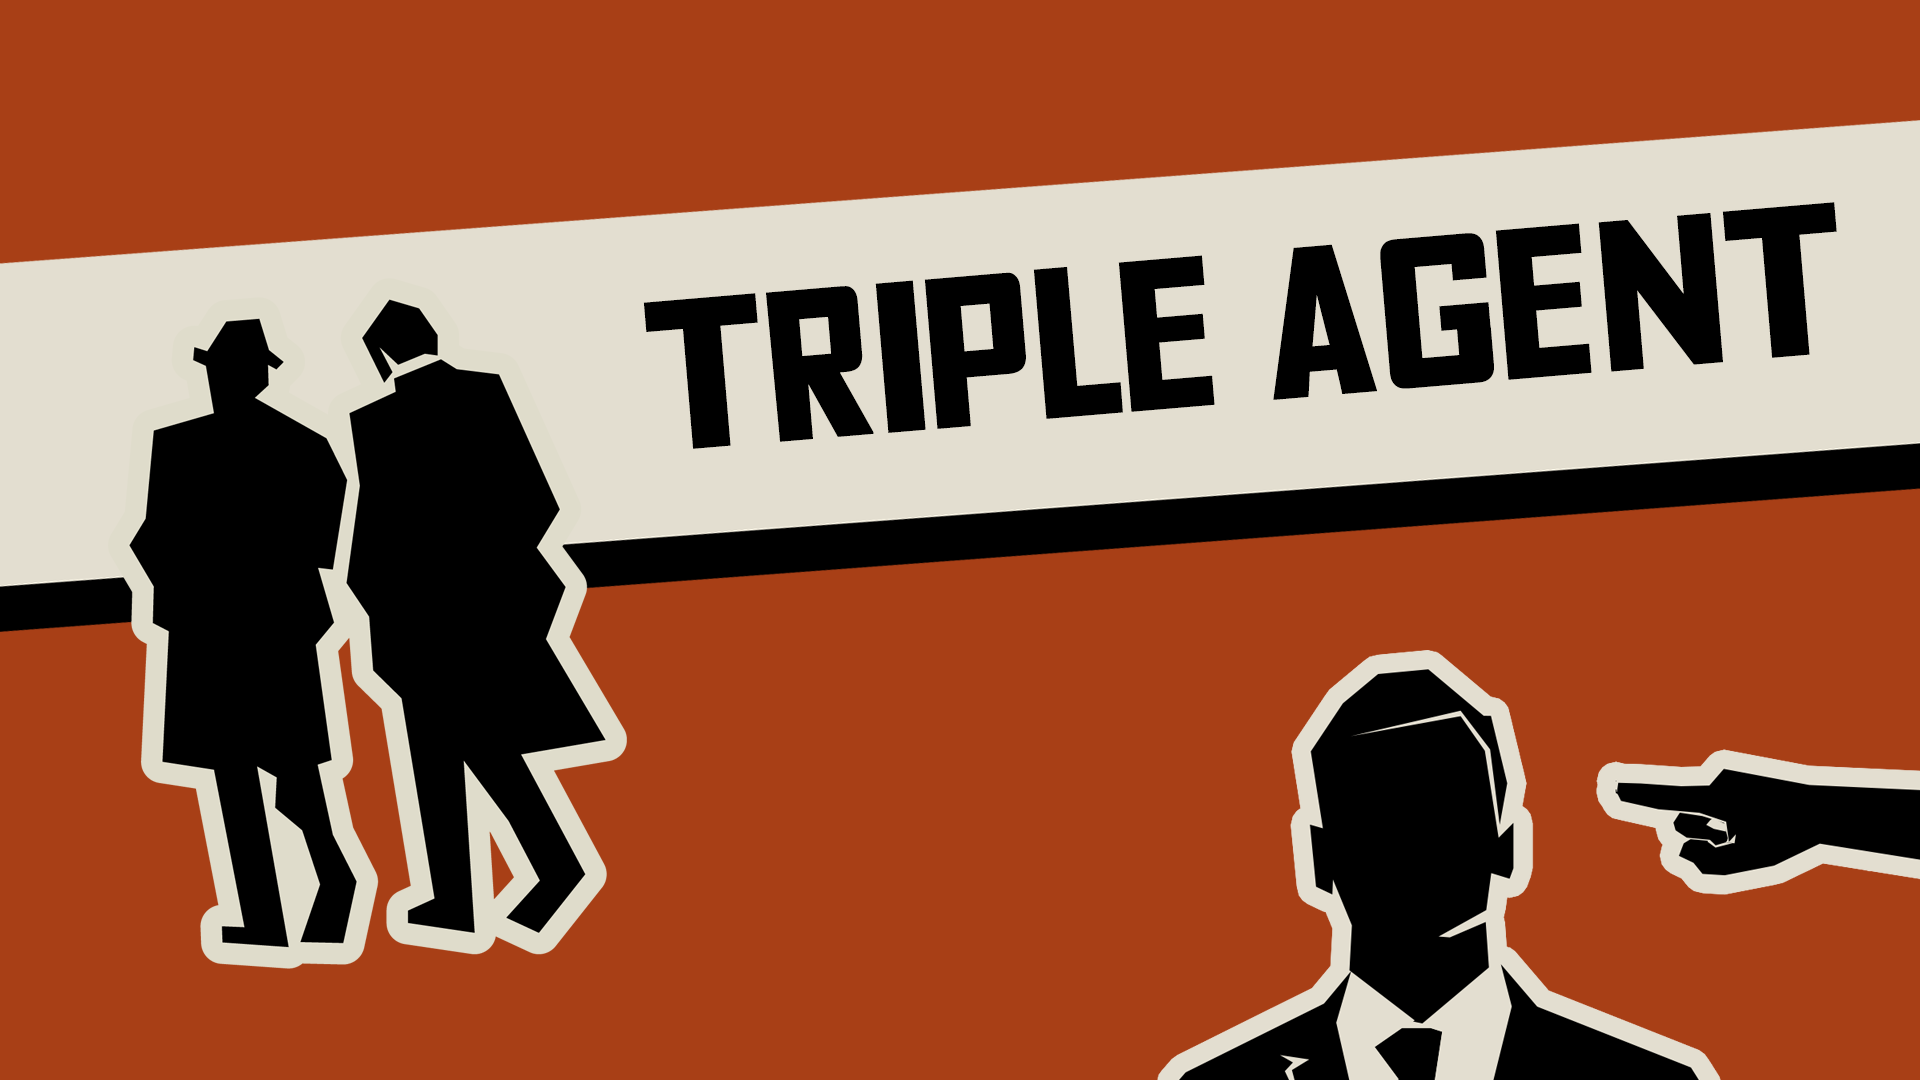 Image of the game Triple Agent